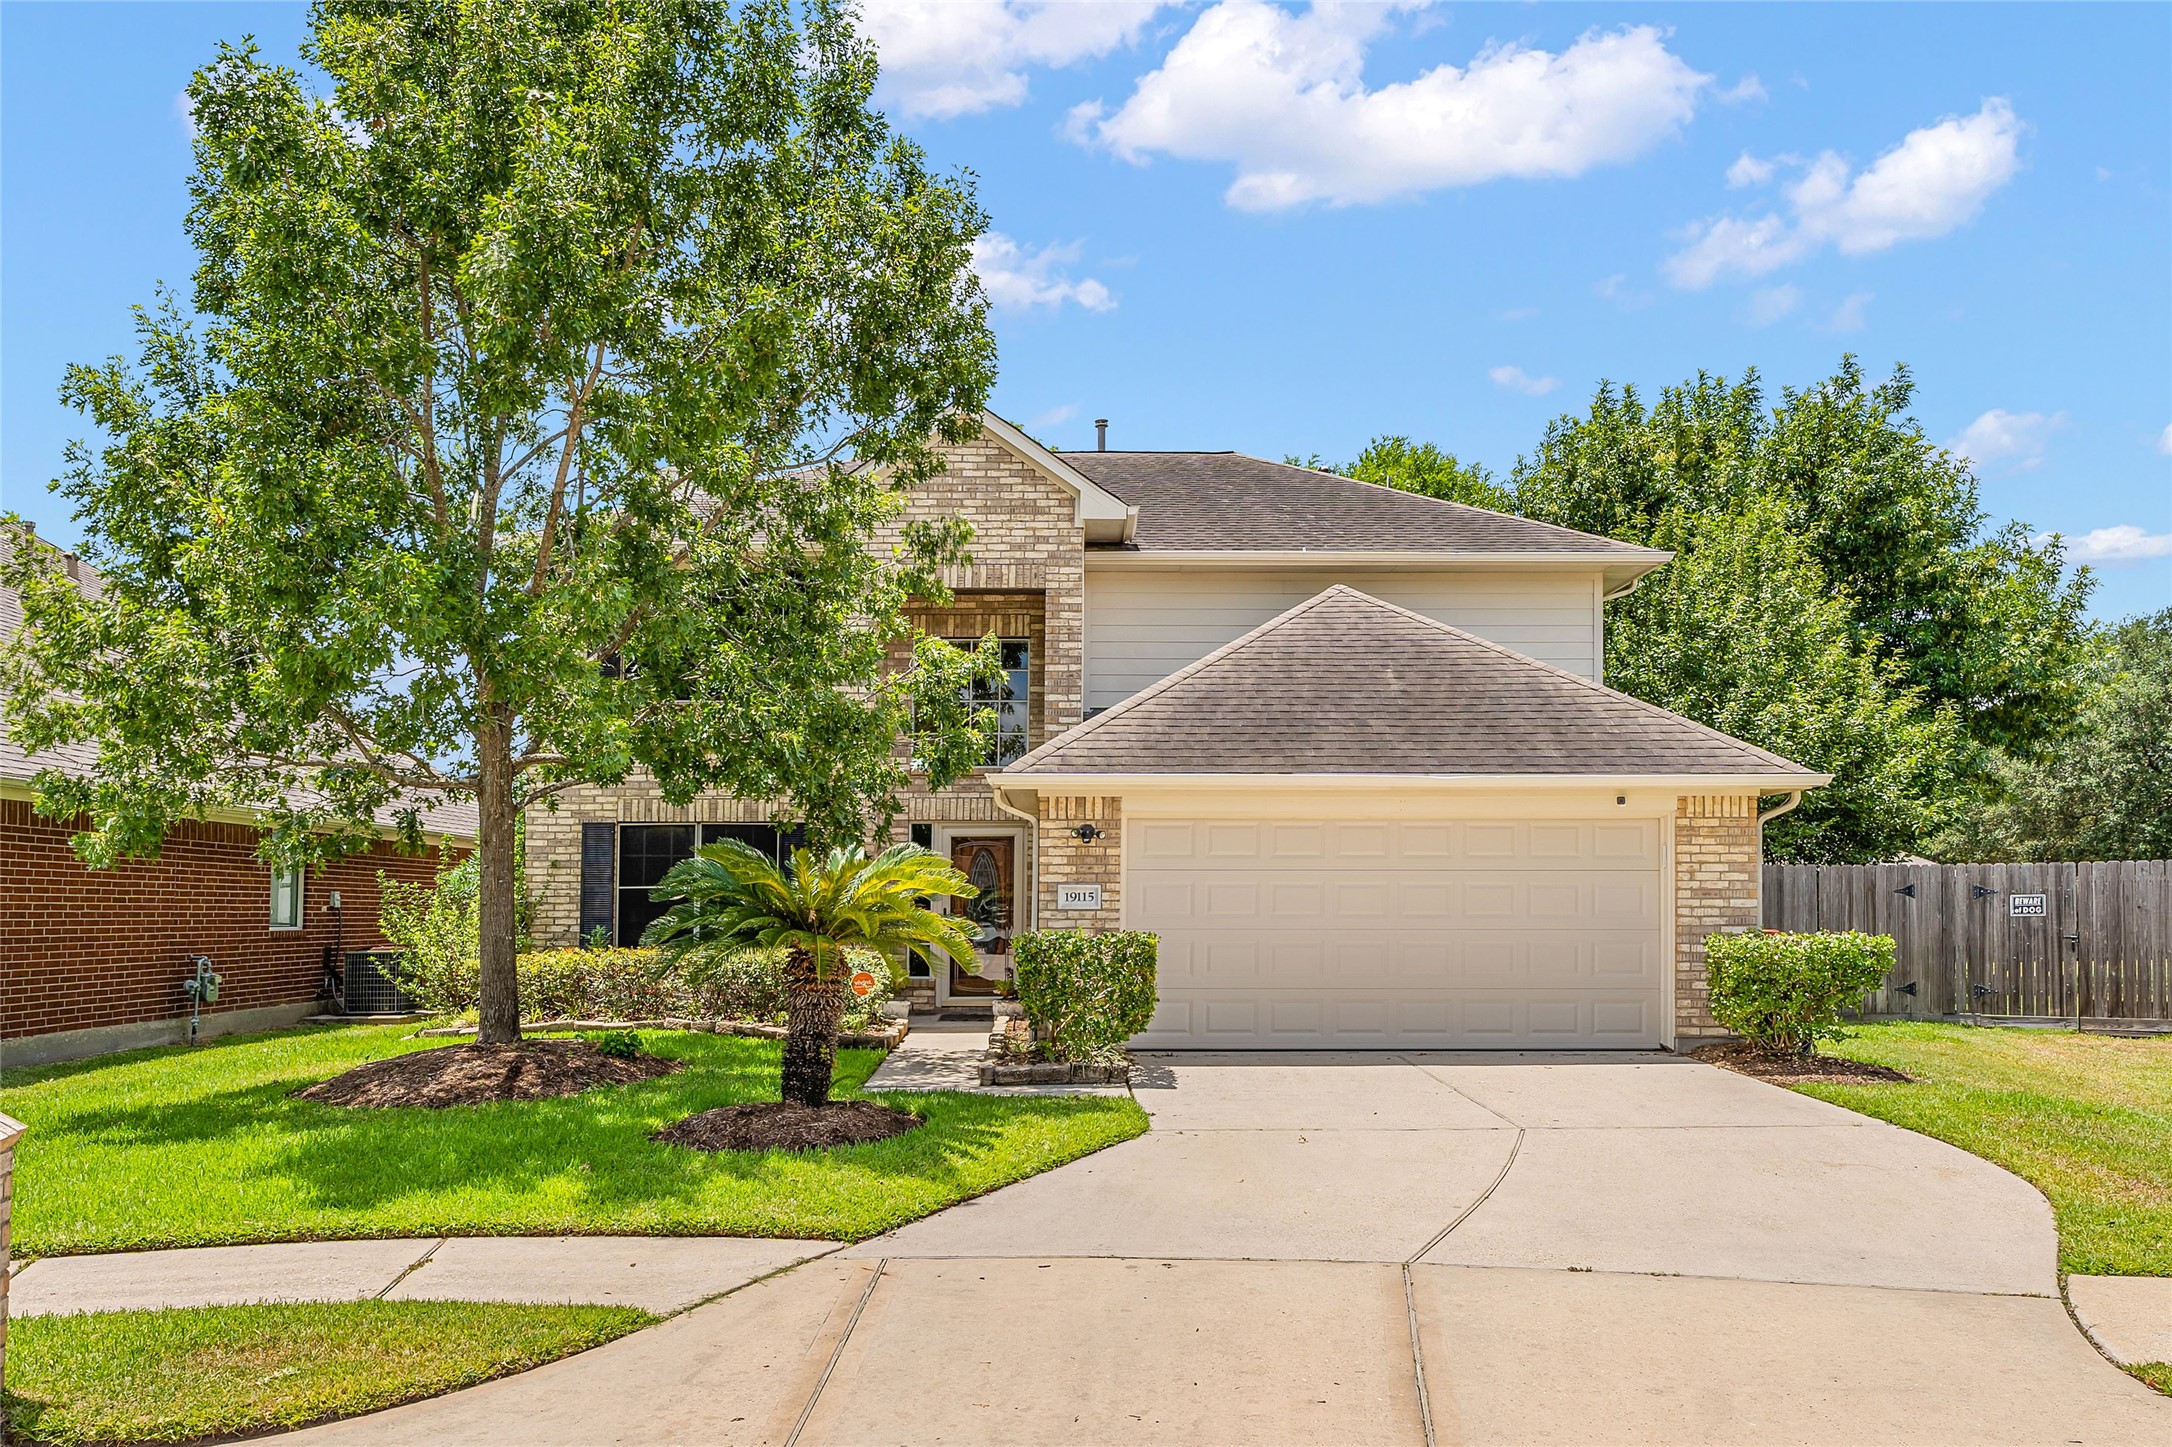 This Home with it's Cul-de-sac Location is just the beginning of a long list of items you will be checking on your list of Features & Benefits including a Generac Power System! Never be without Cooling Air Conditioning or lighting again.